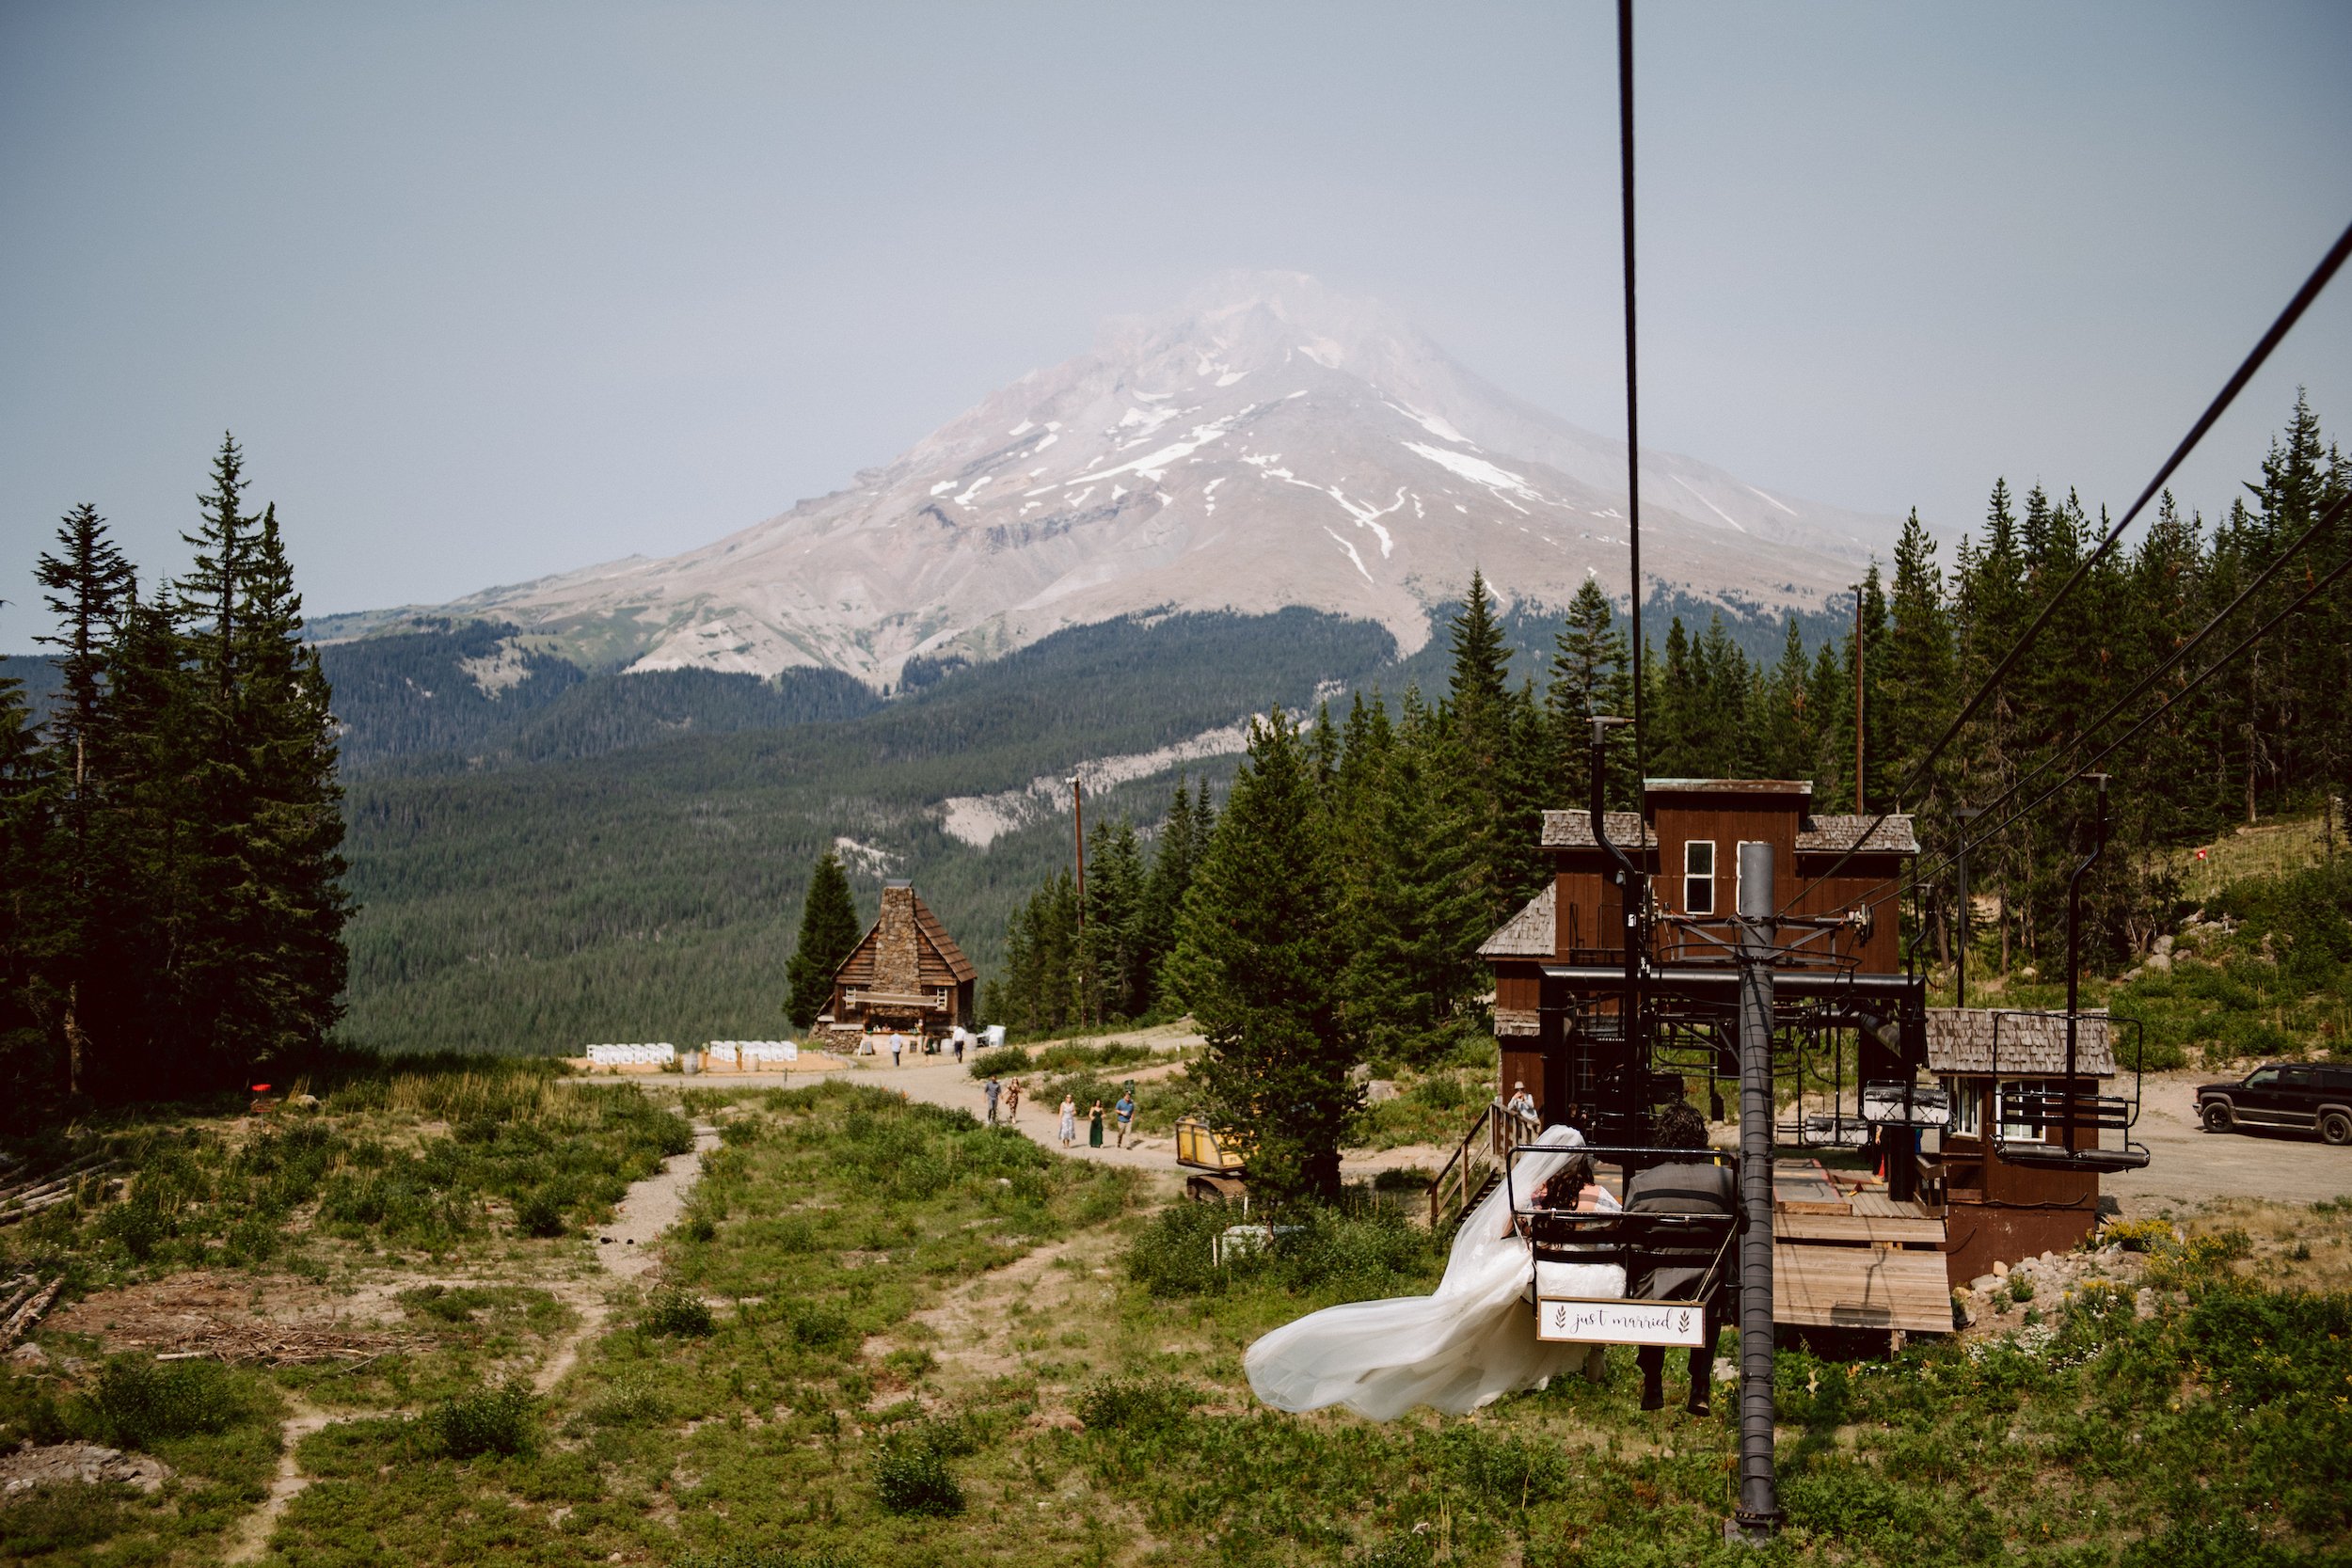 A bride and groom ride a ski lift towards their ceremony site which is located at the bottom of a mountain. Her dress is flowing in the wind as they descend.